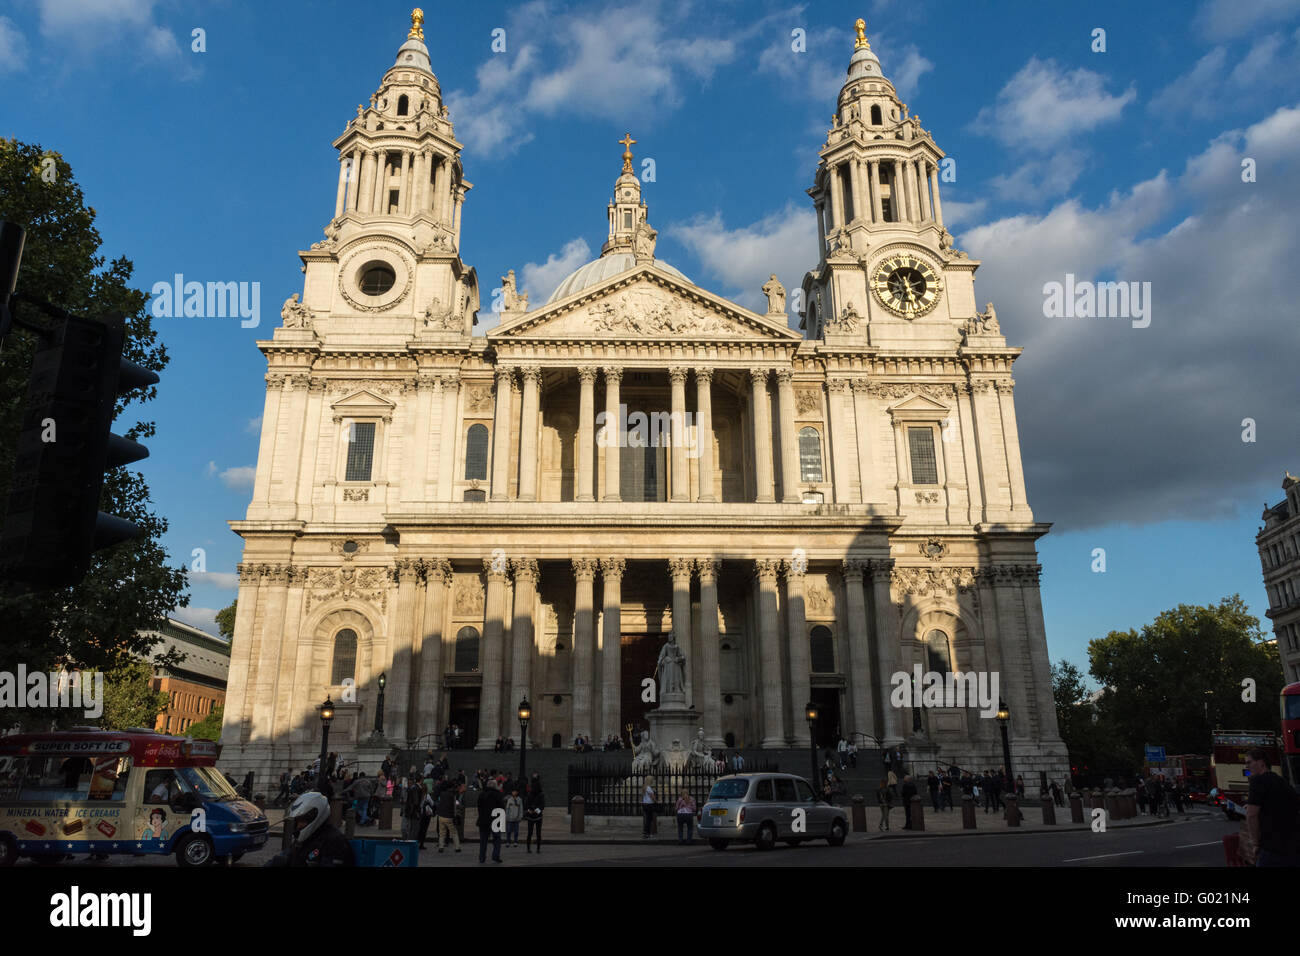 Main Entrance of St Paul's Cathedral, London, England with tourists outside Stock Photo